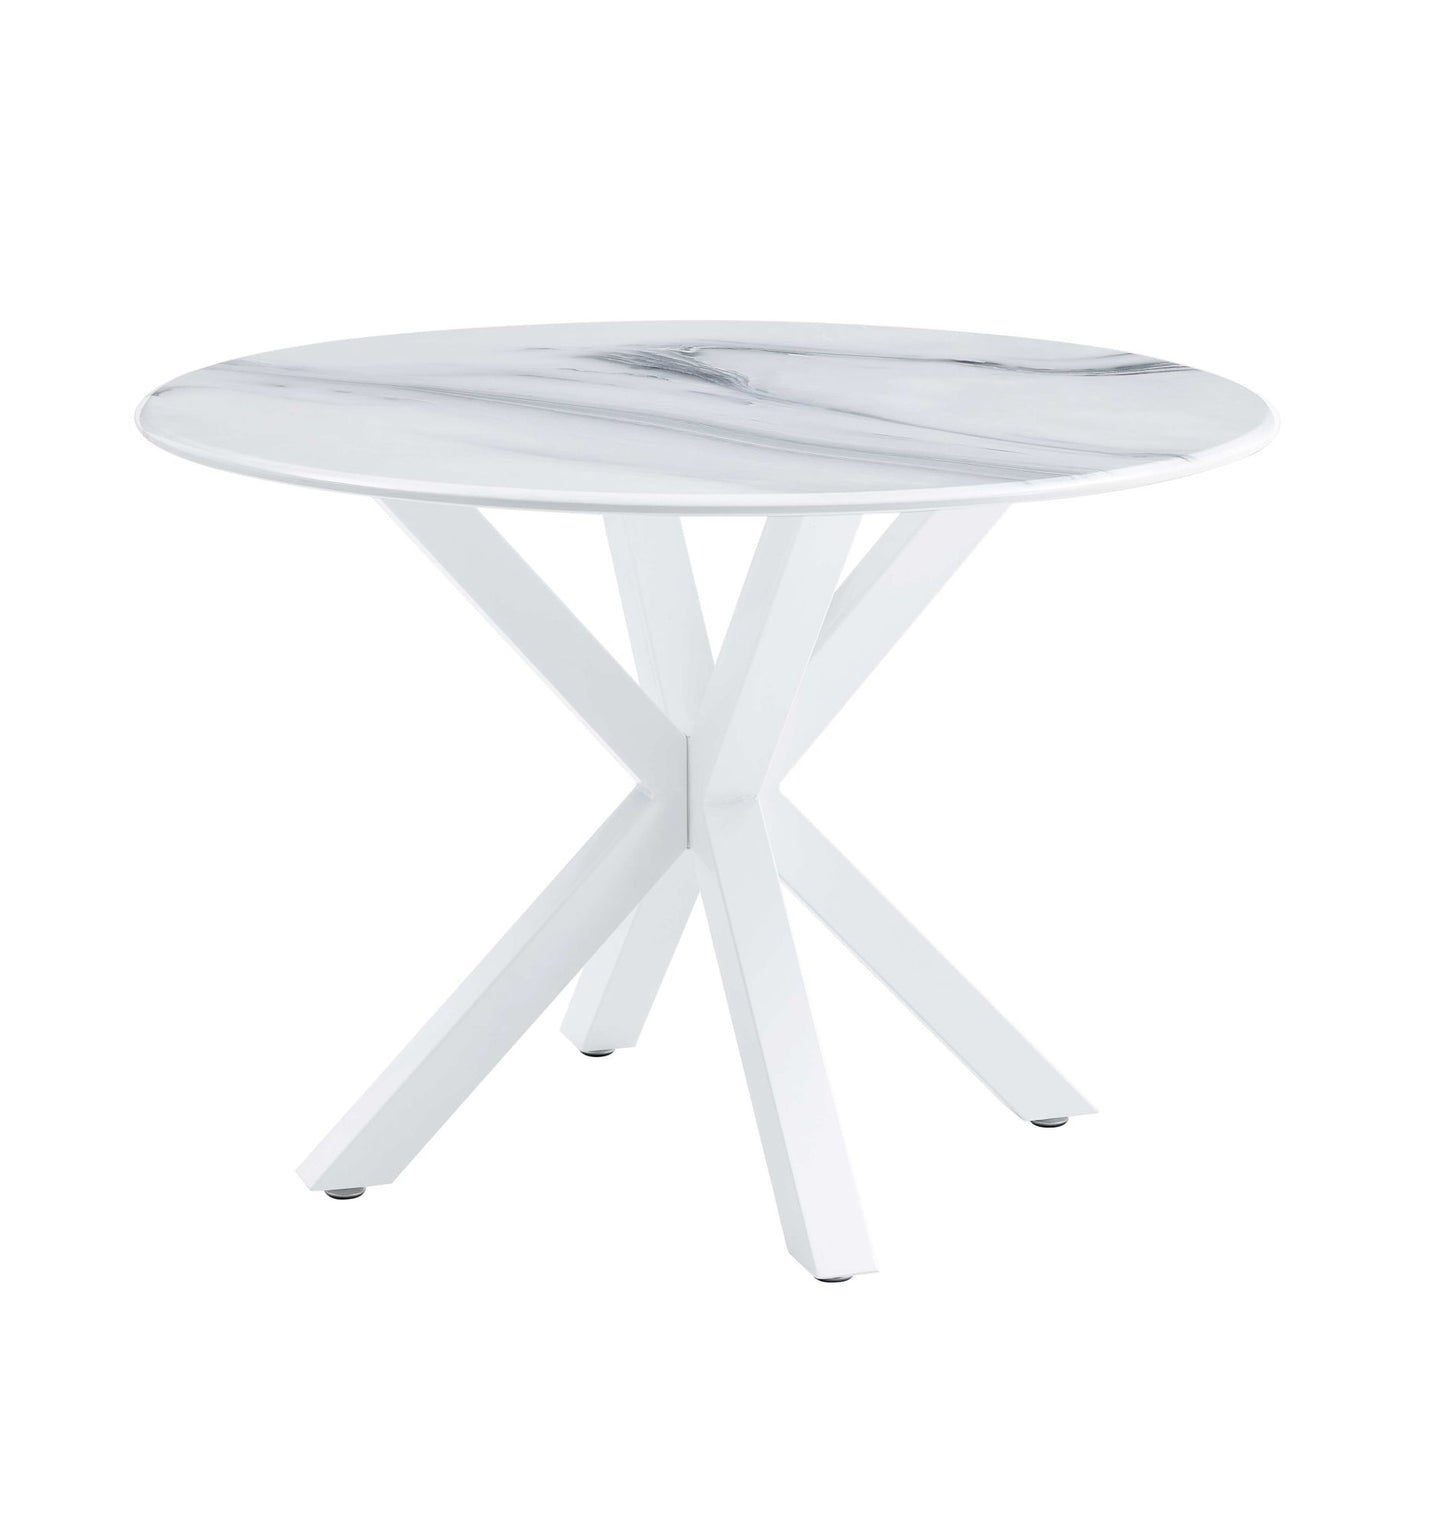 mdf dining table set, white